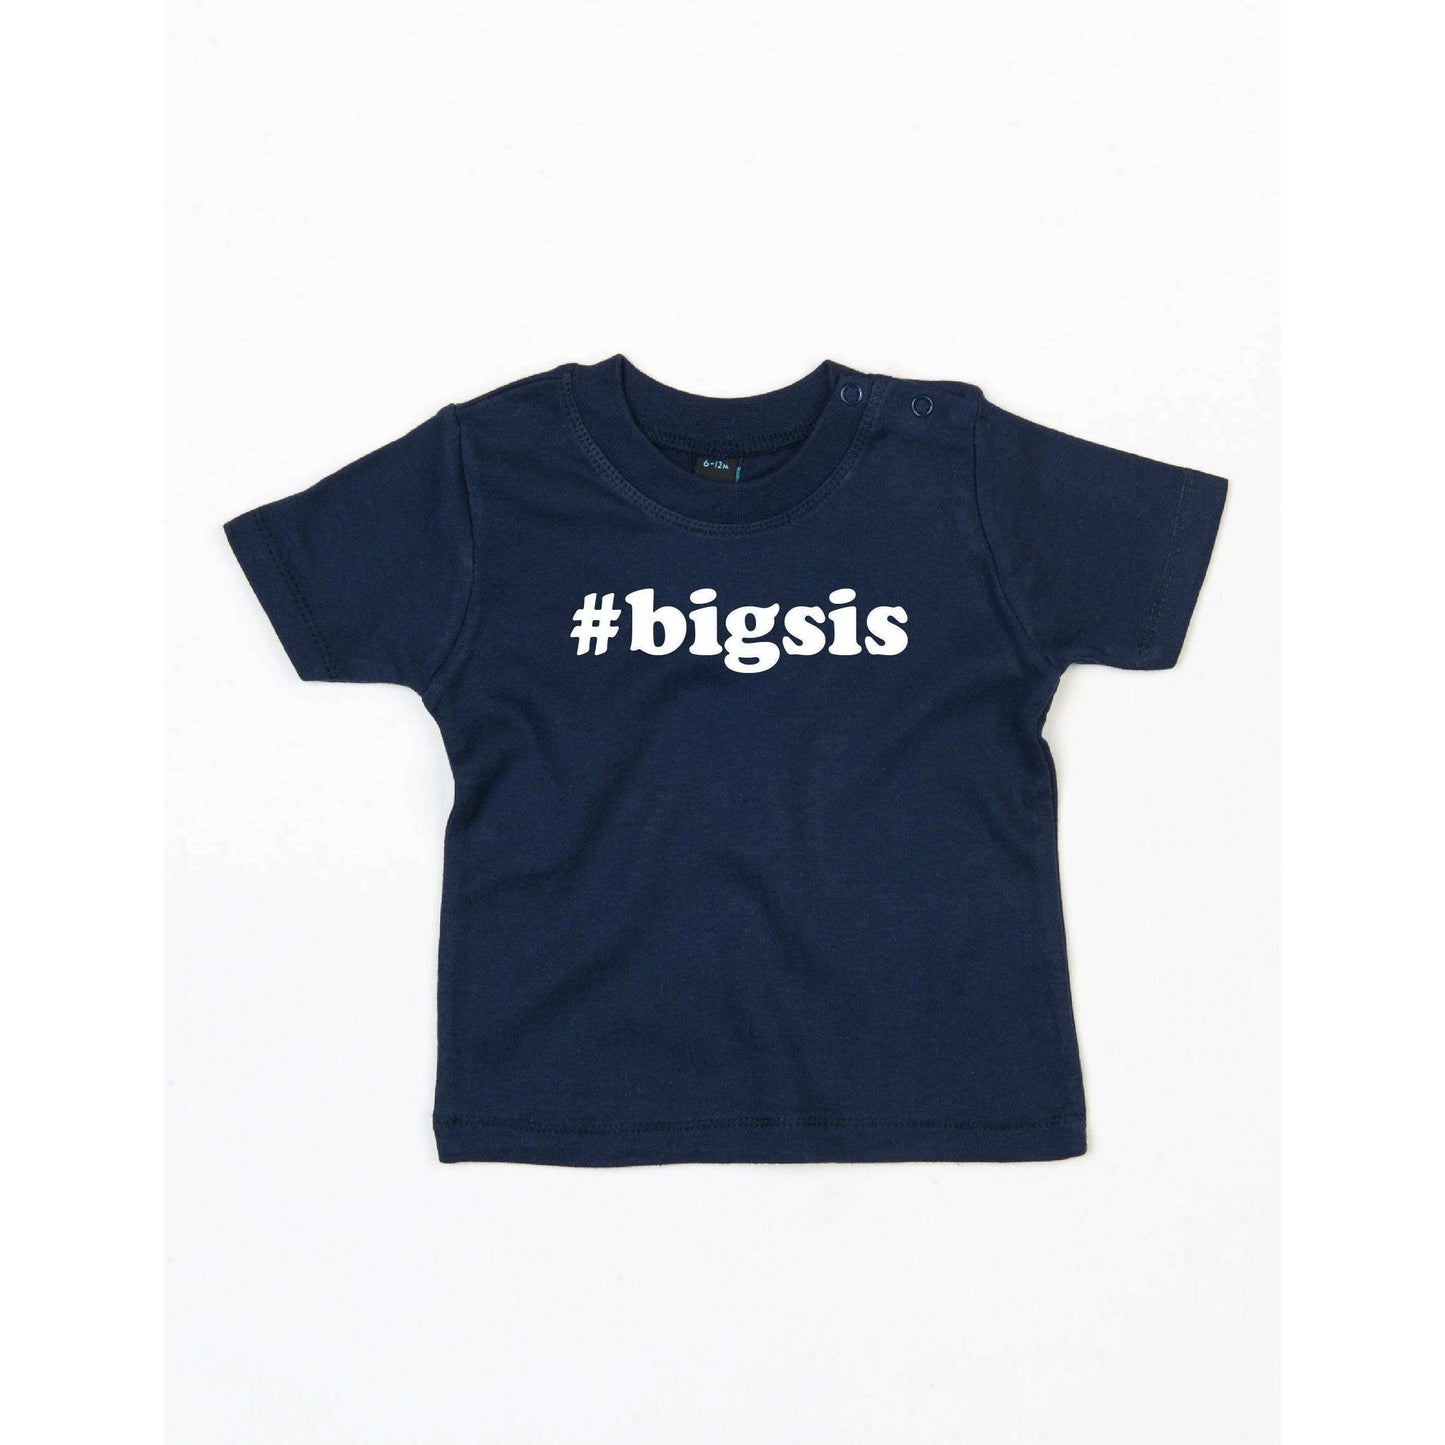 Big Sister shirt, i'm going to be promoted to big sister t shirt